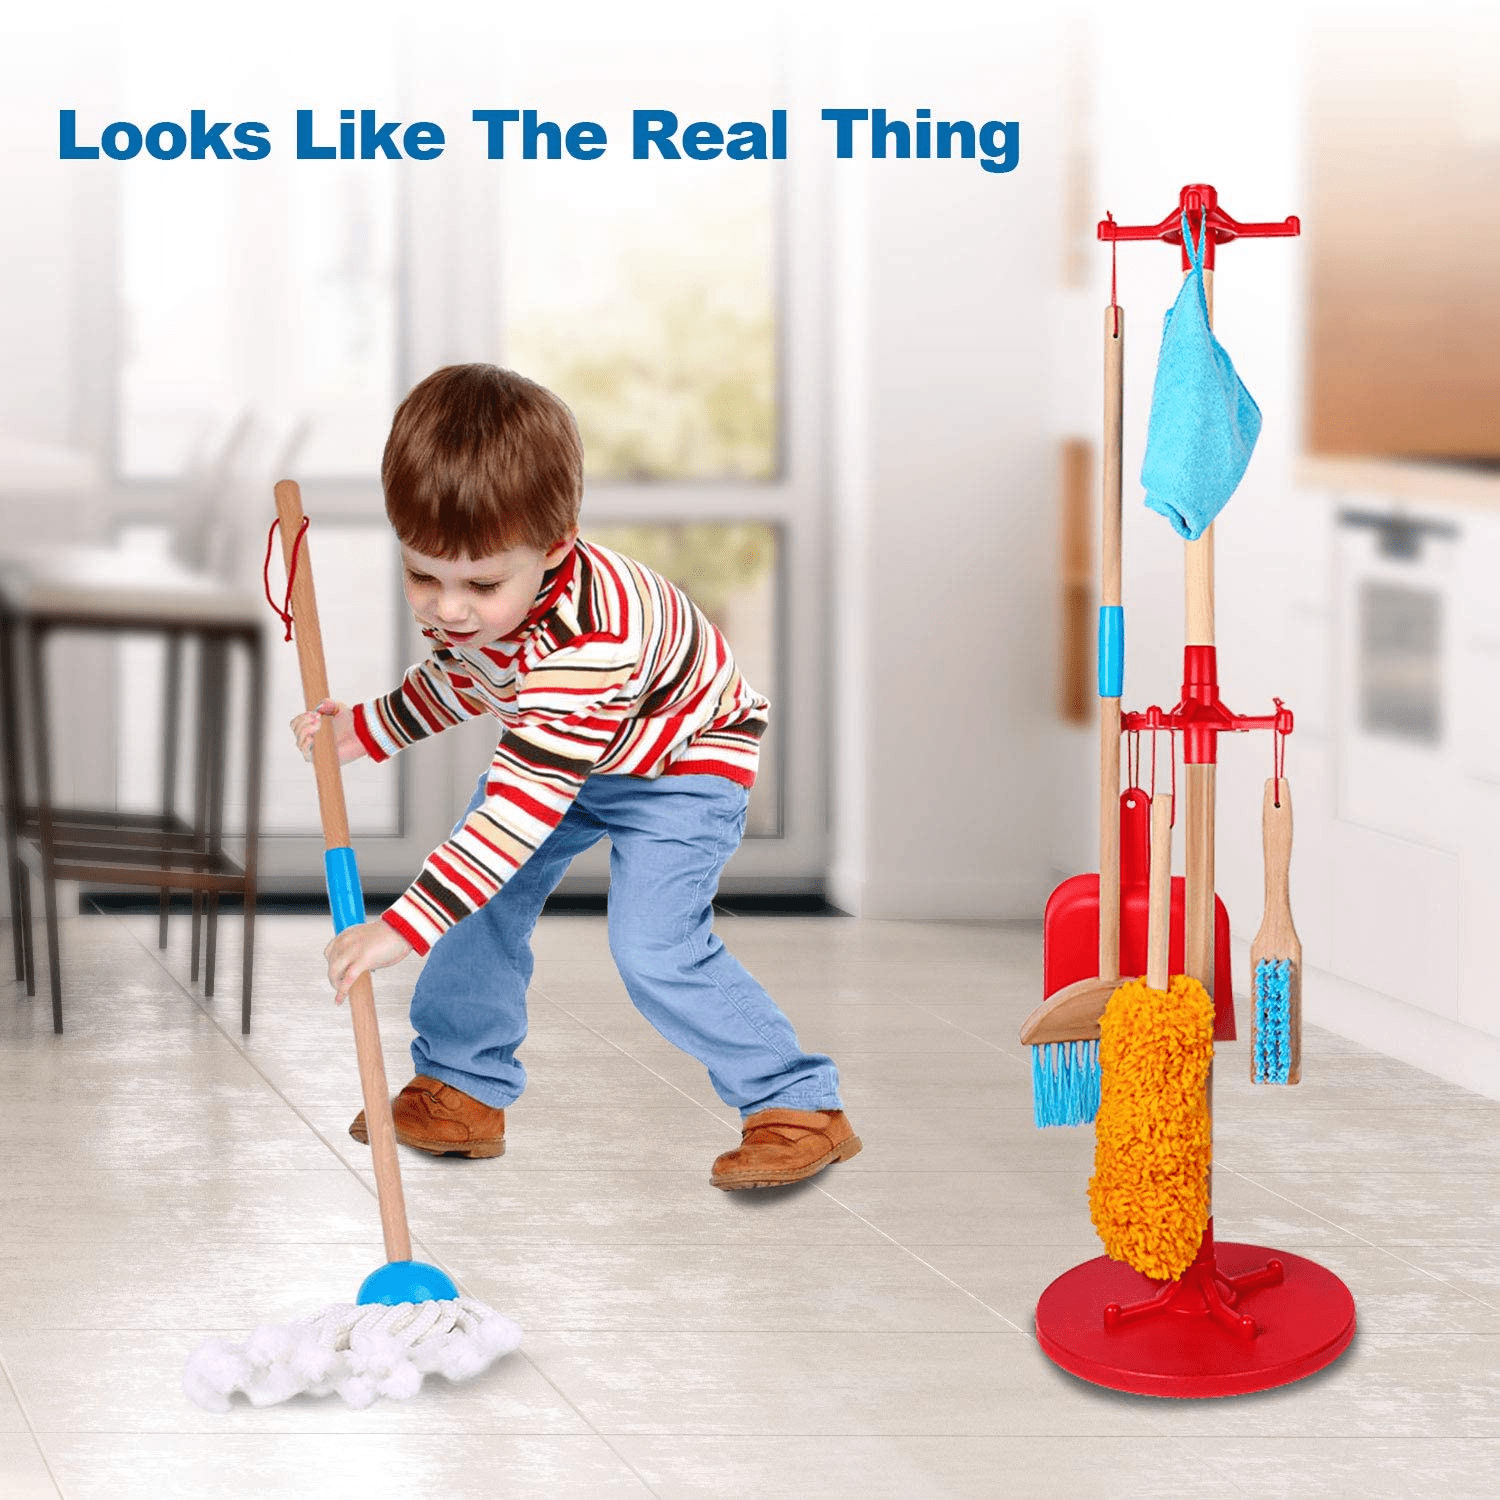 12X Kids Cleaning Set Toy Cleaning Set Educational Broom and Mop Toy  Montessori♚